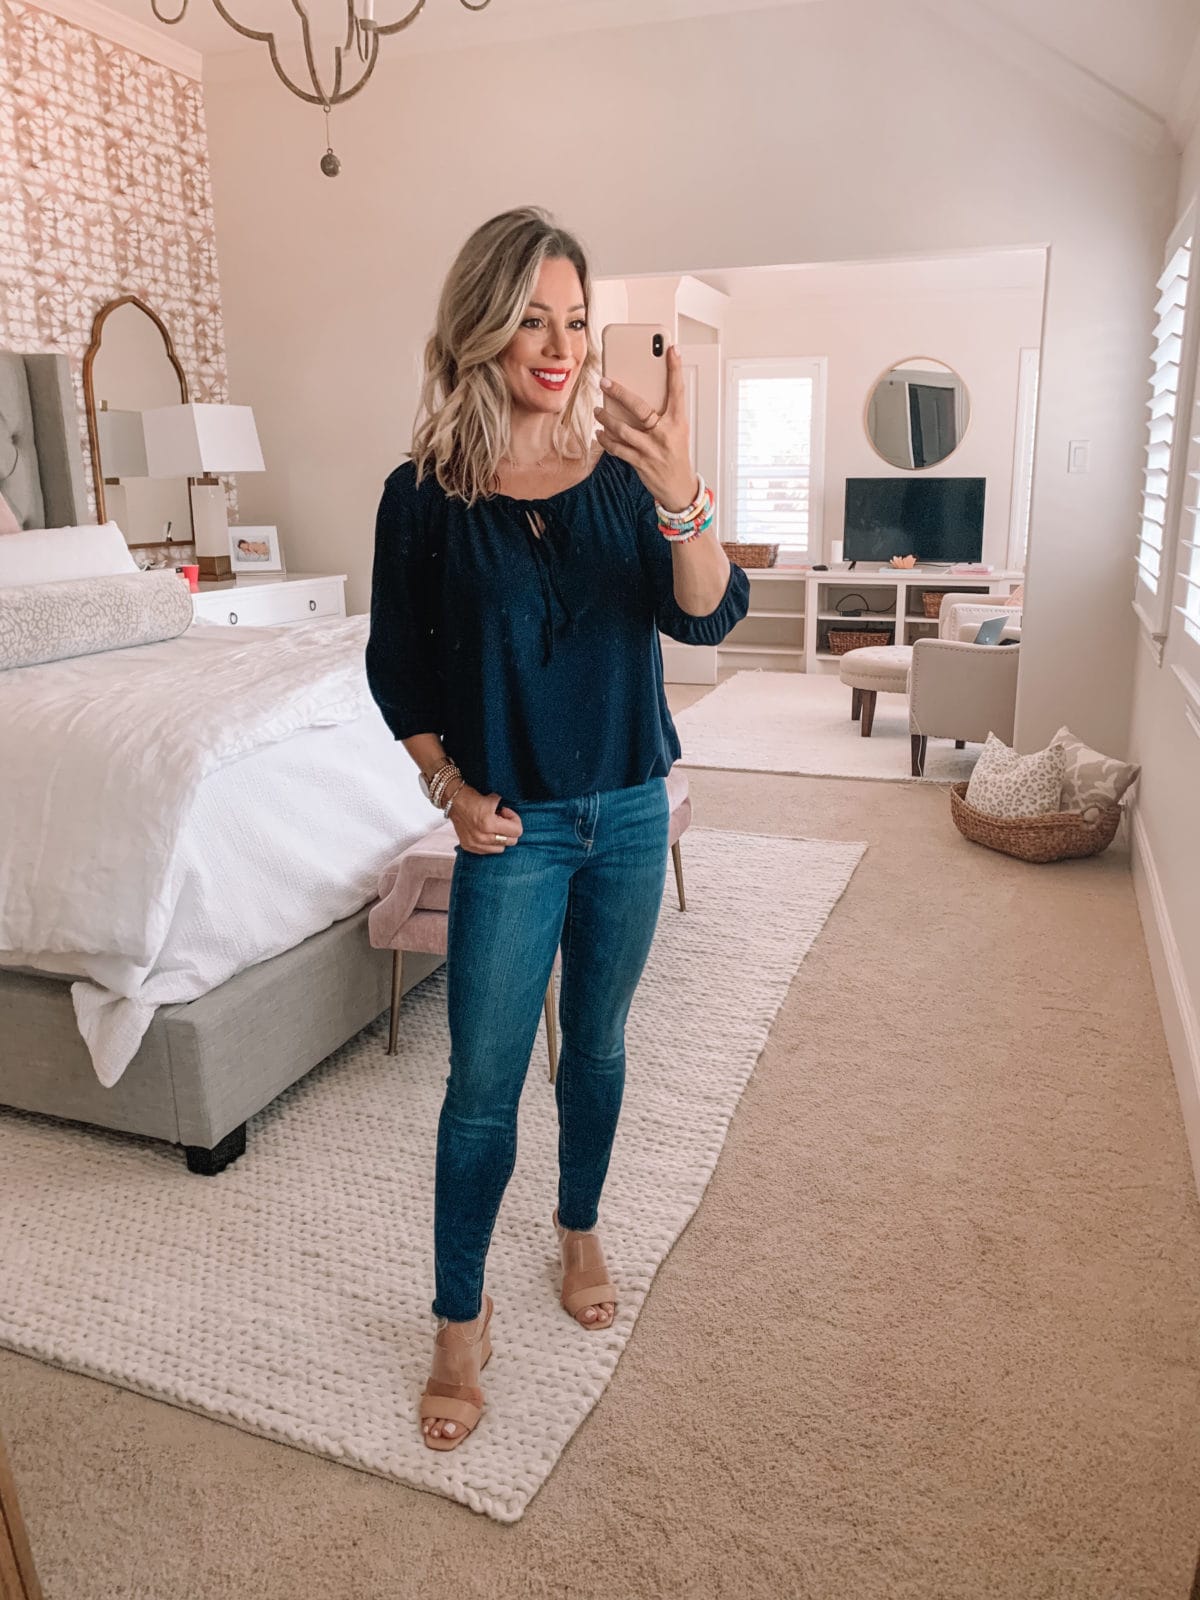 Amazon Fashion Finds, Peasant Top, Skinny Jeans, Sandals 